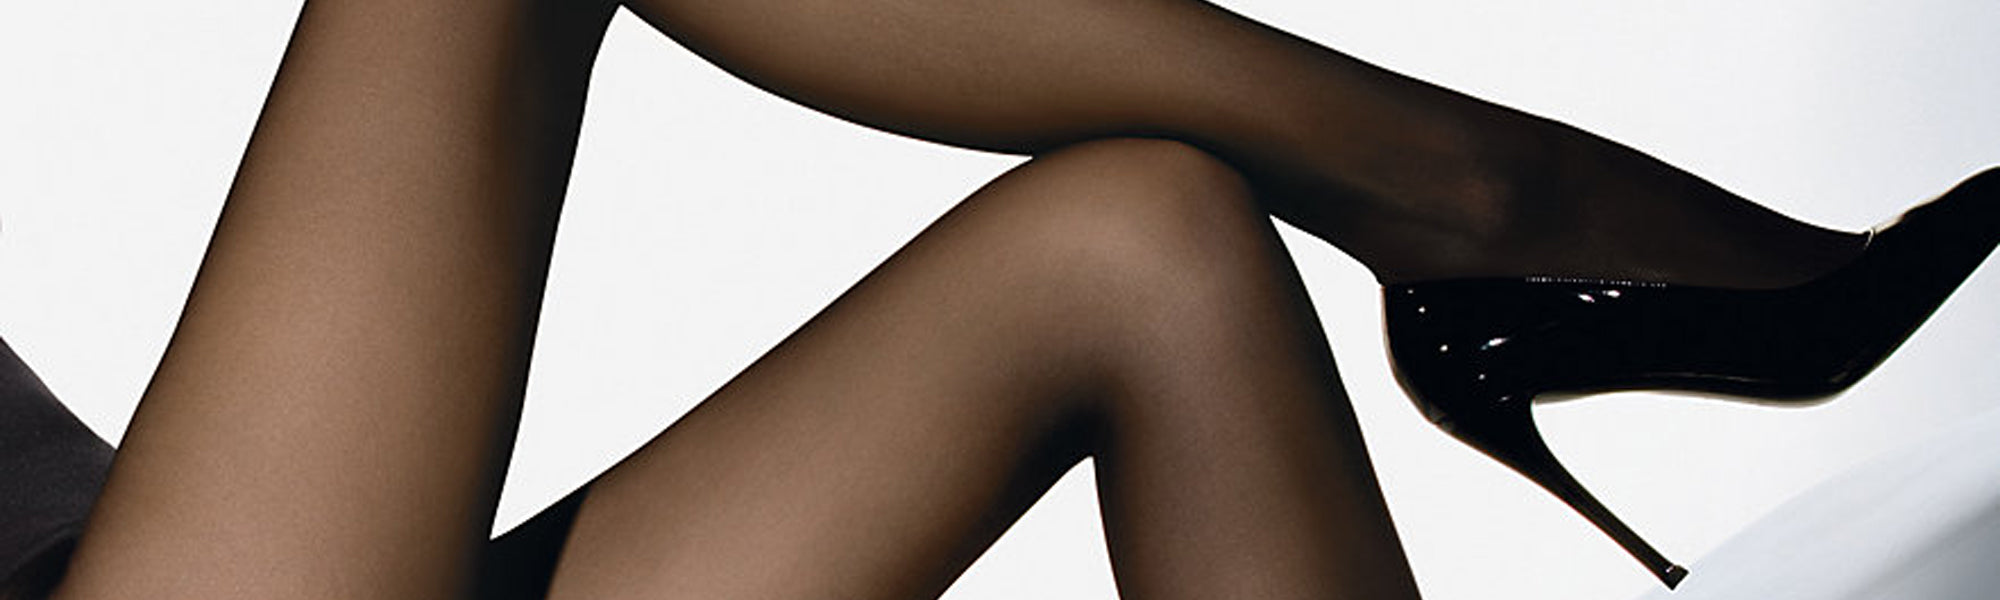 Wolford, Luxurious World Renowned Lingerie